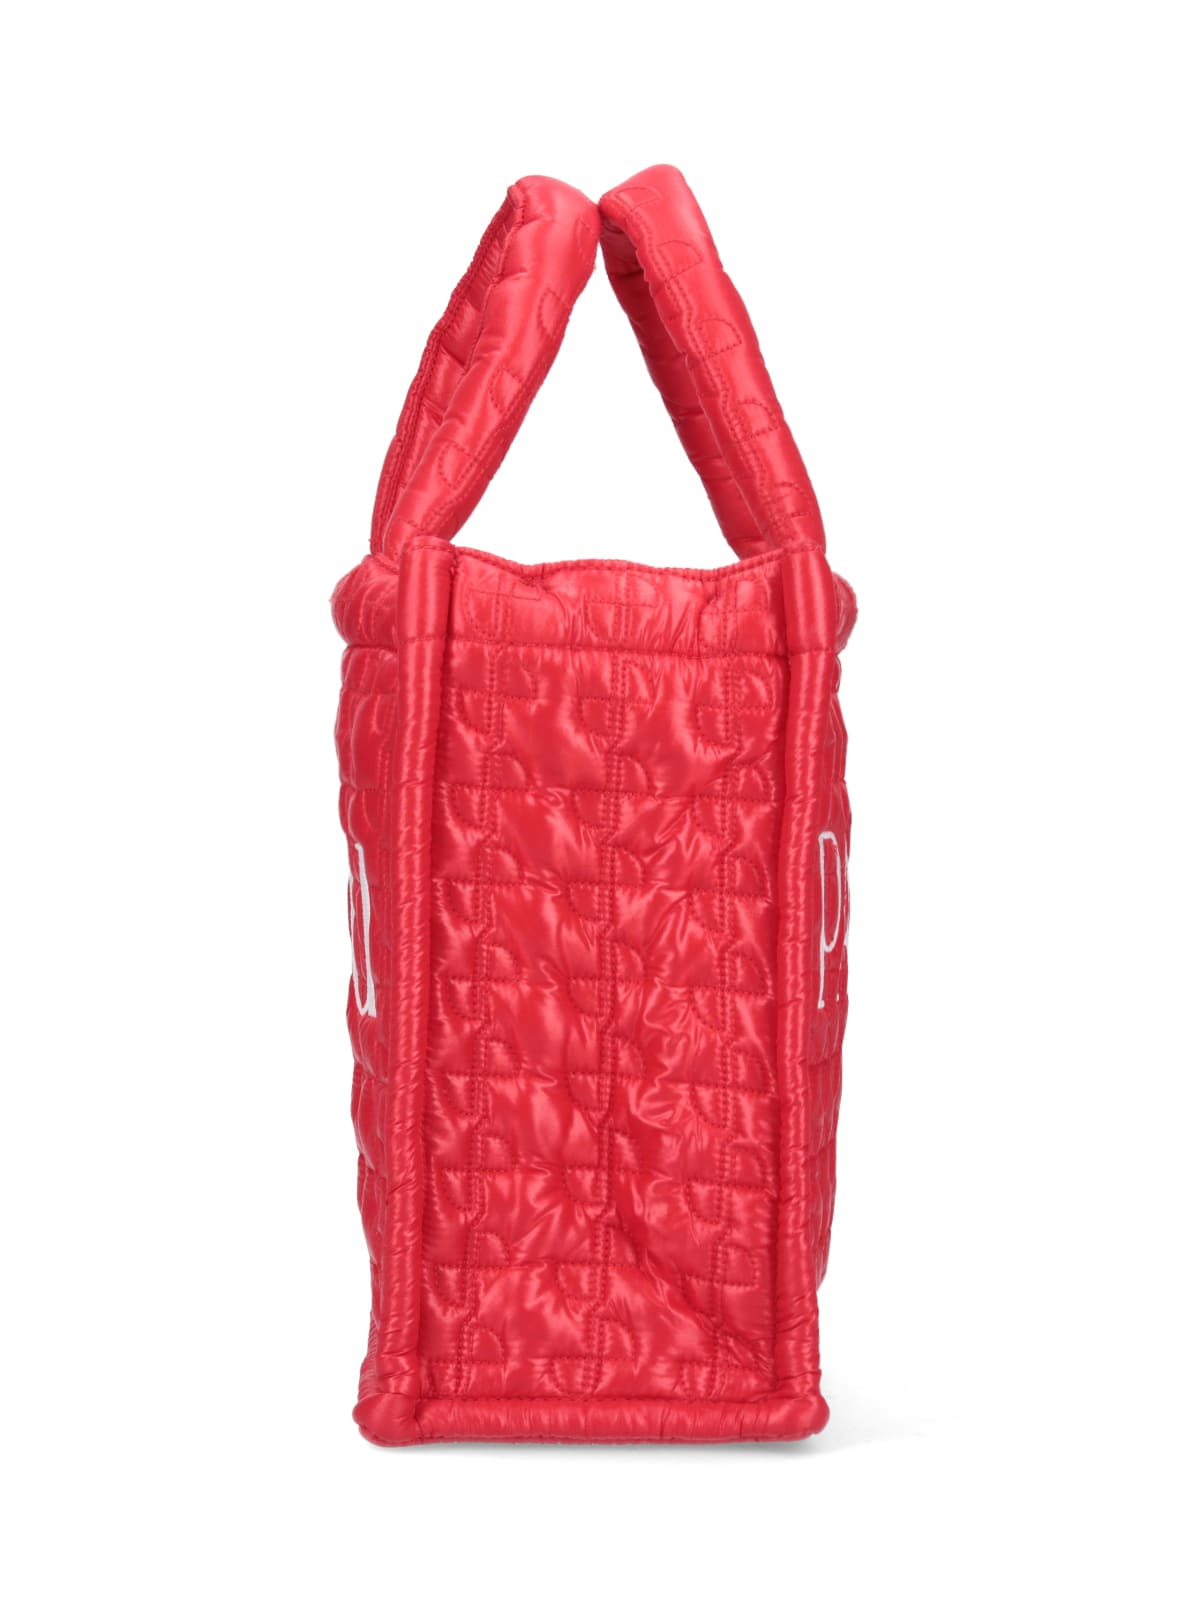 Shop Patou Small Quilted Tote Bag In Red